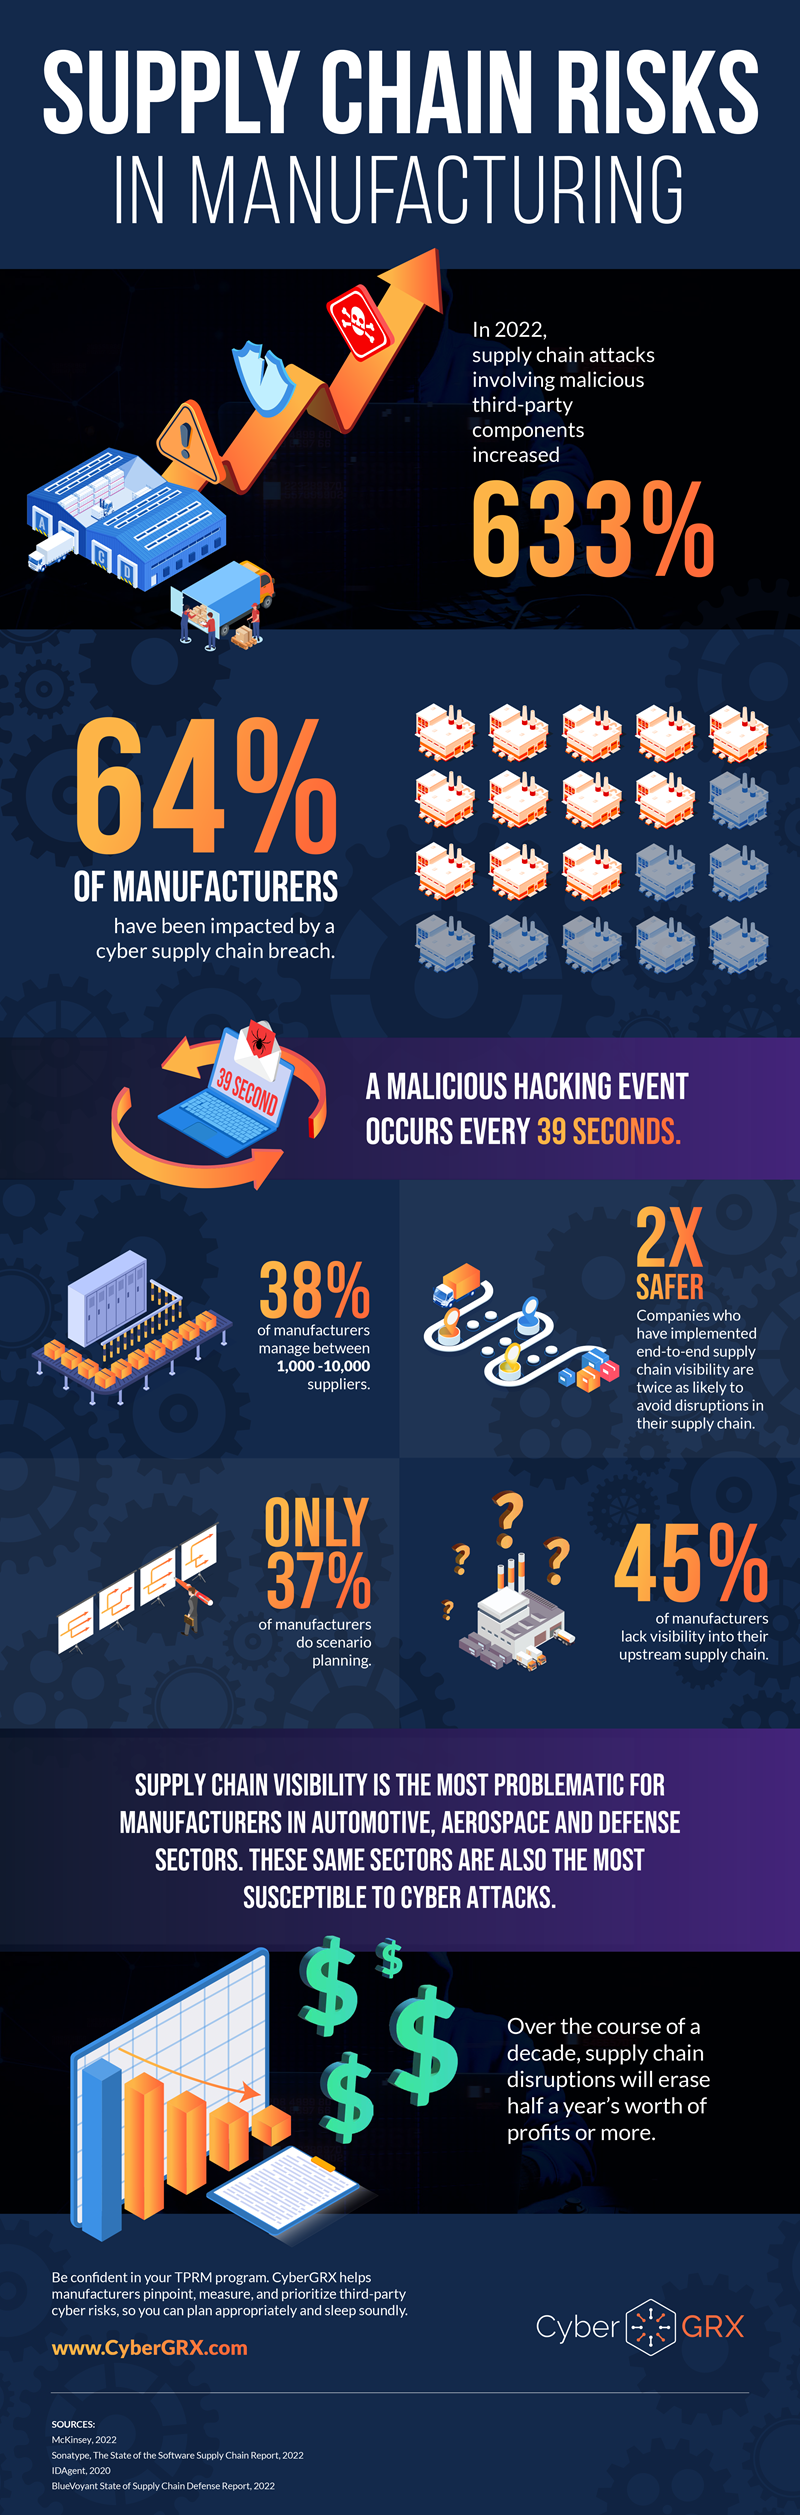 Supply Chain Risks in Manufacturing